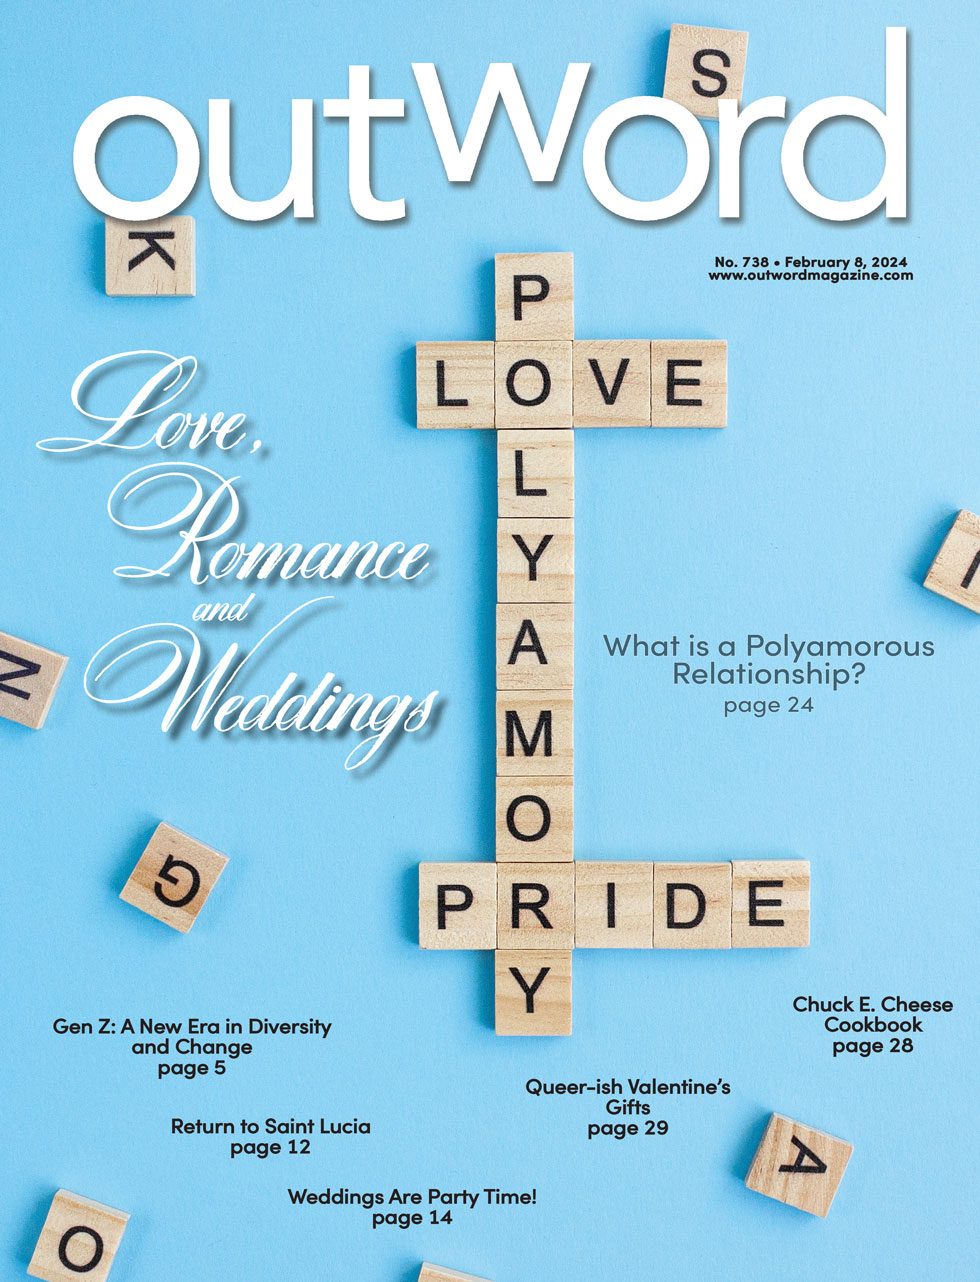 Outword Romance Issue cover 2024